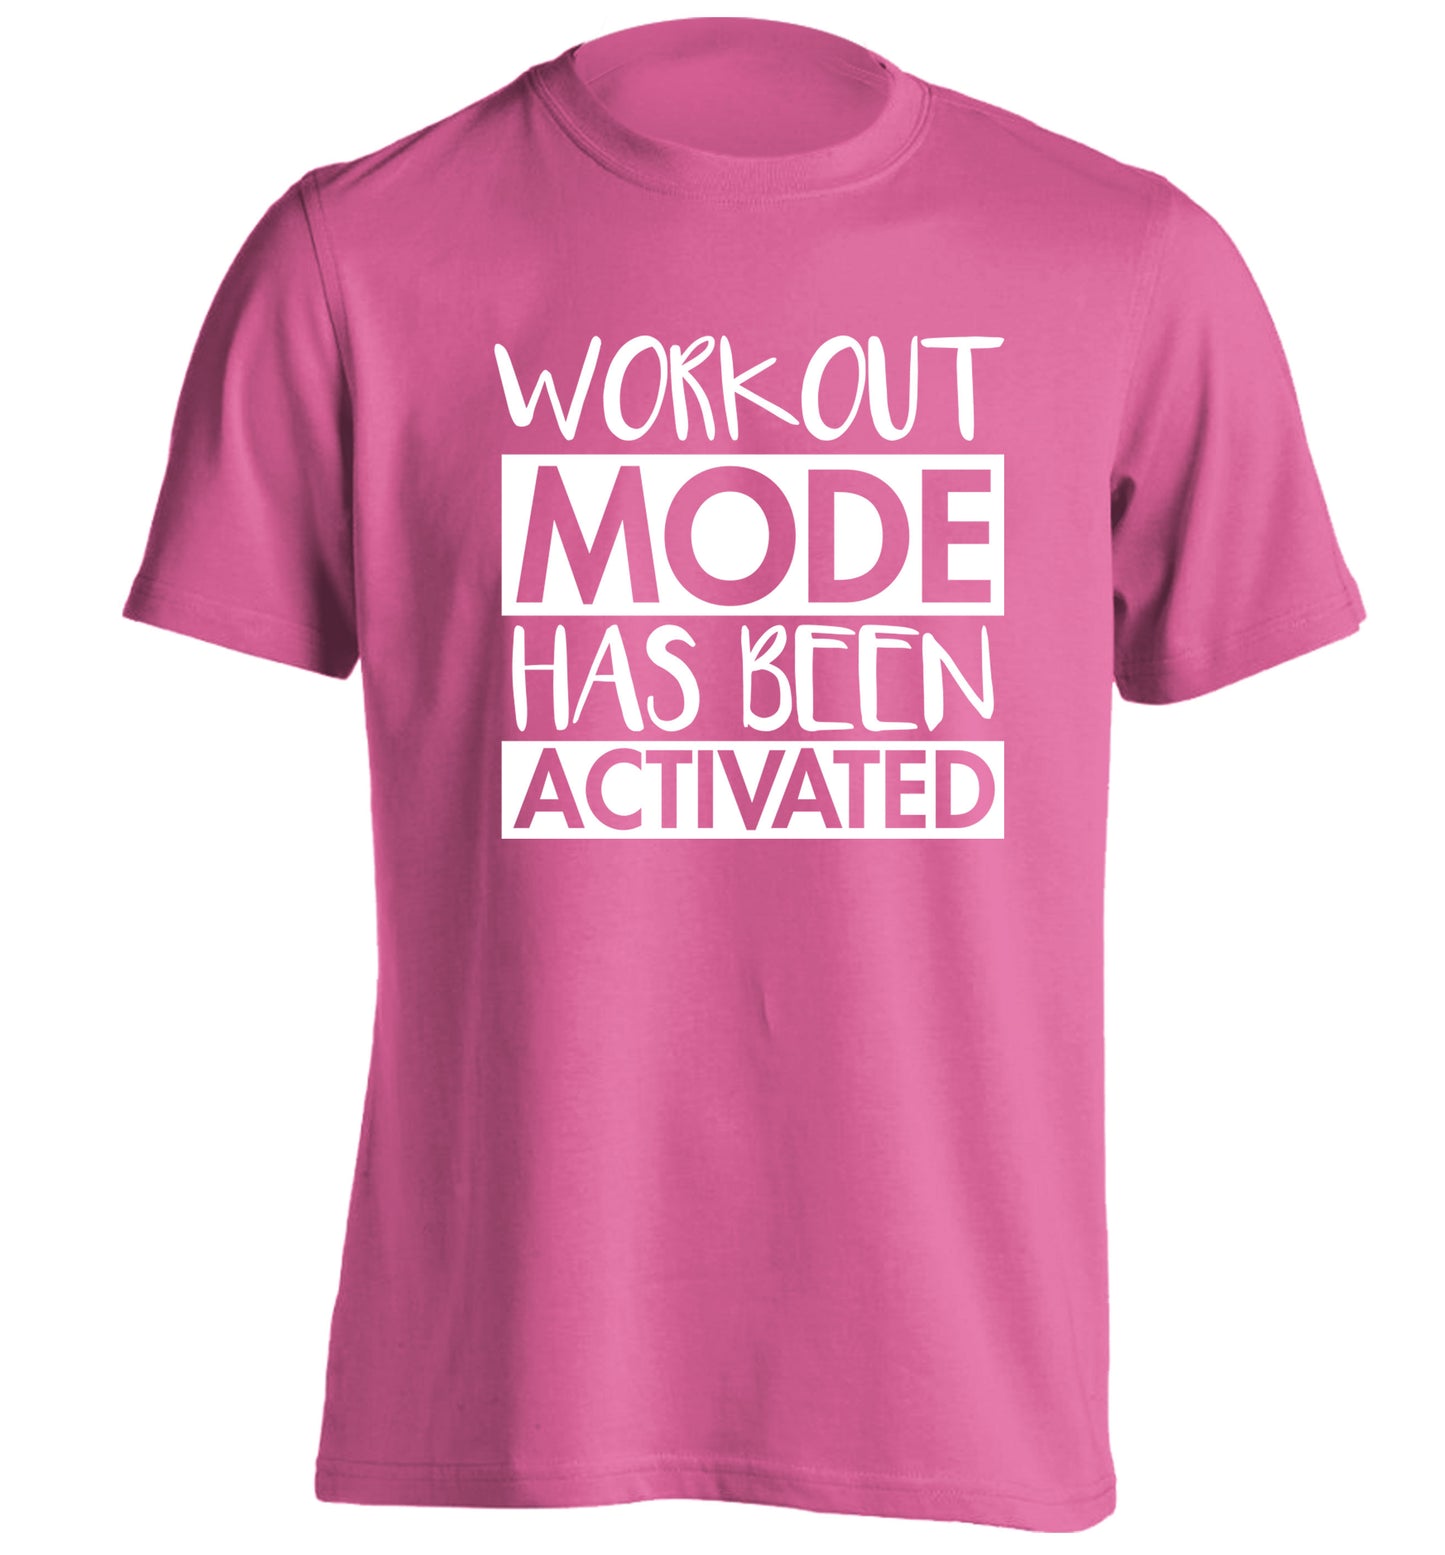 Workout mode has been activated adults unisex pink Tshirt 2XL